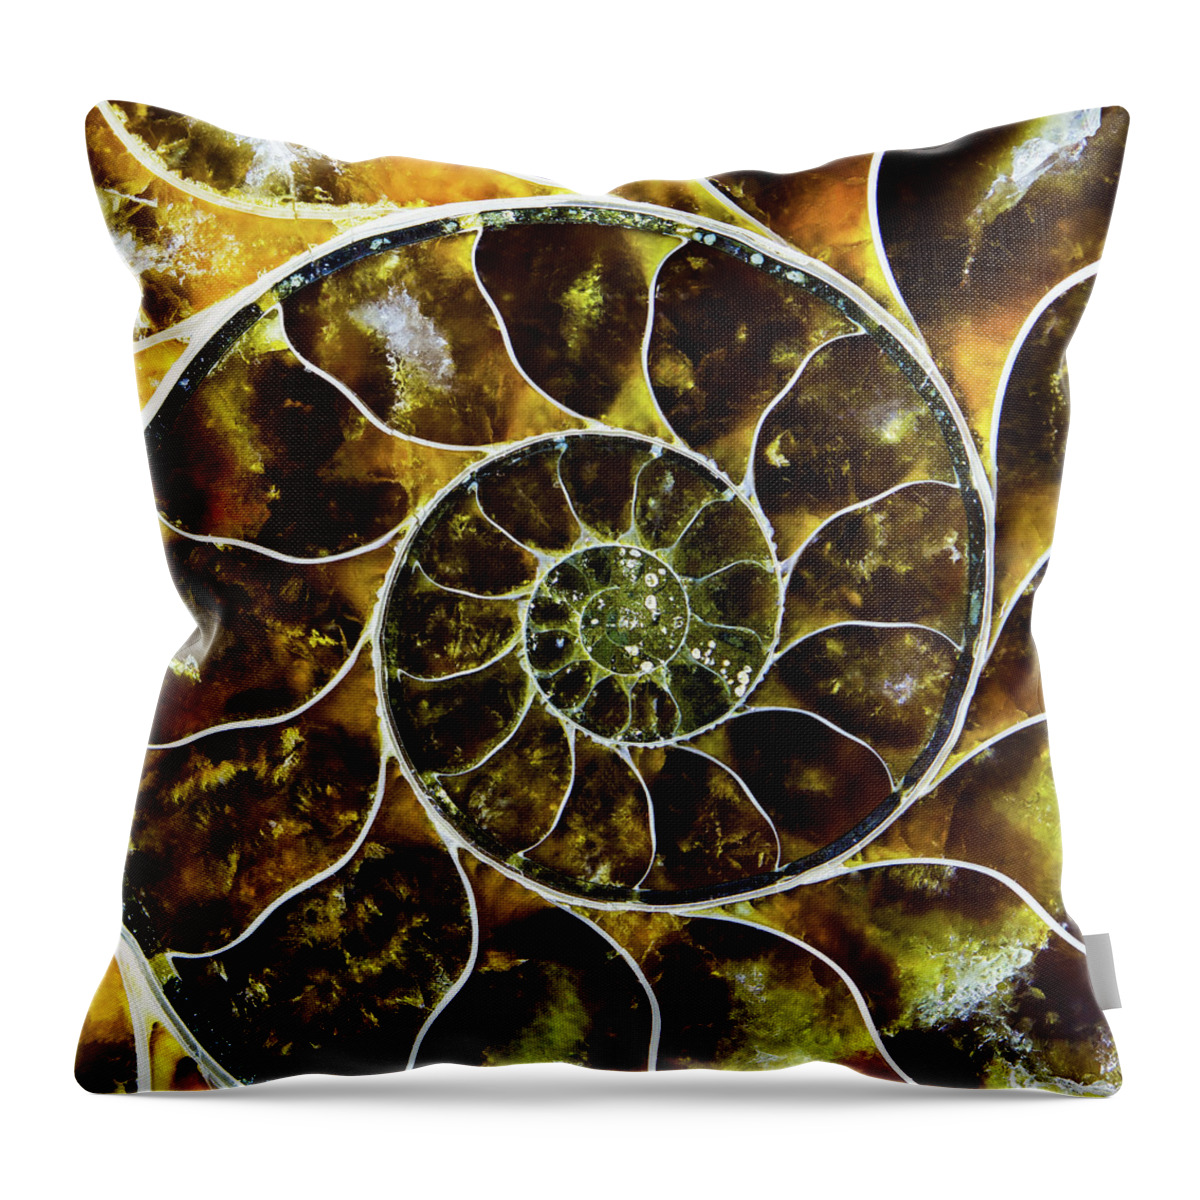 Fine Art Photography Throw Pillow featuring the photograph Spiral Staircase by John Strong